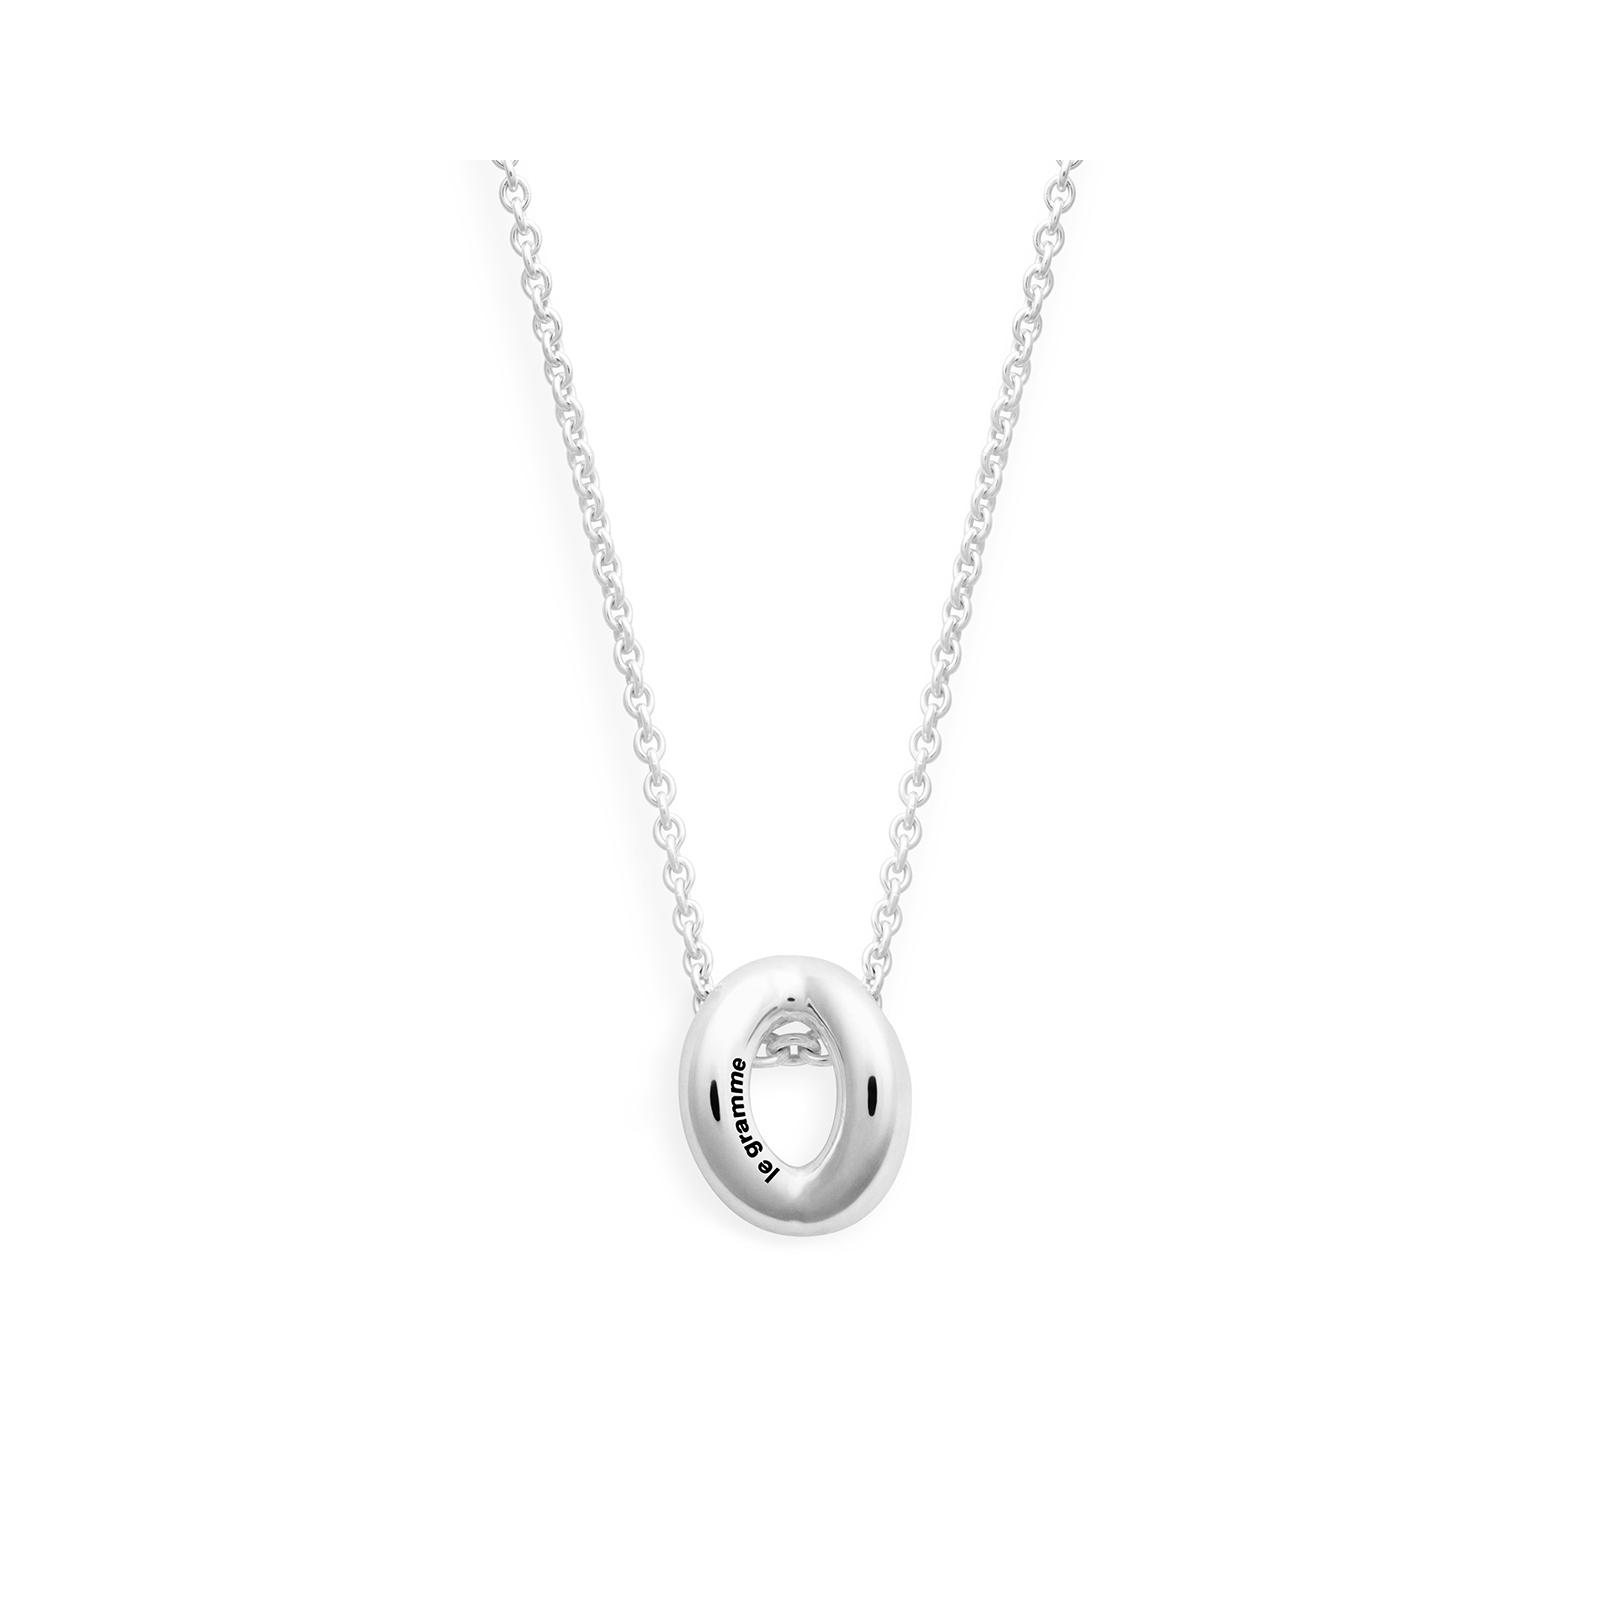 1g polished entrelacs pendant and chain necklace